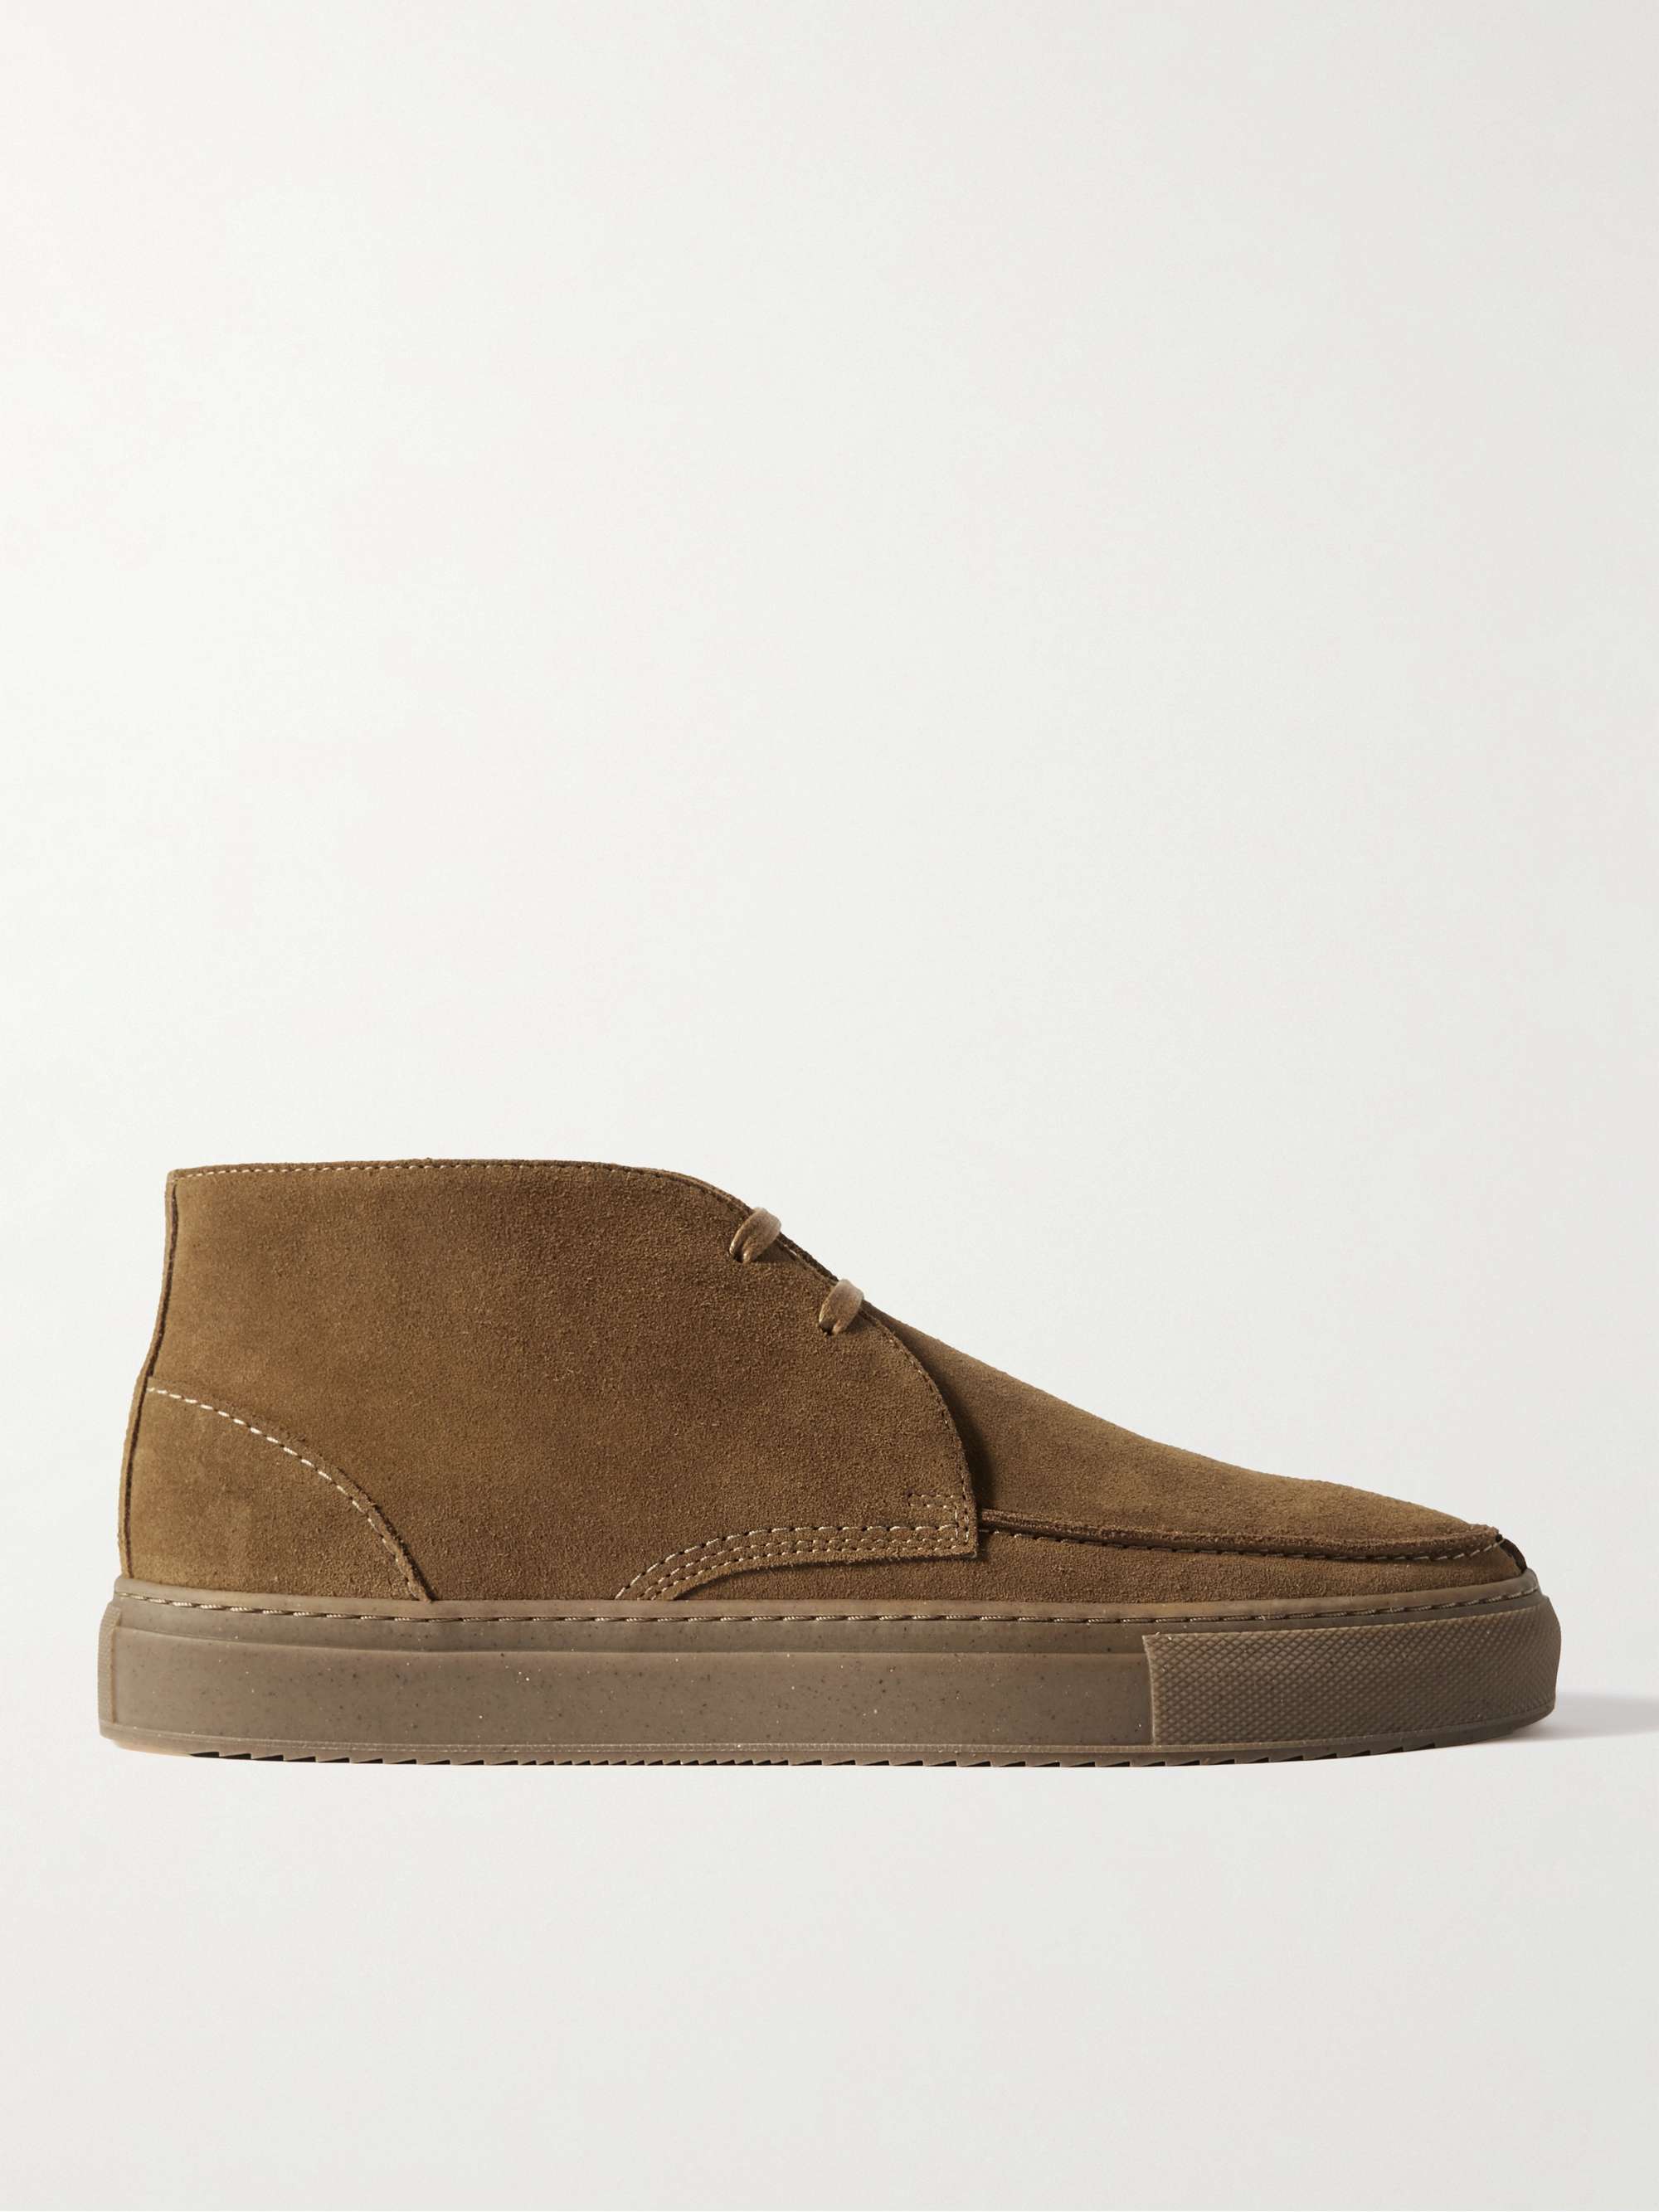 MR P. Larry Split-Toe Regenerated Suede by evolo® Chukka Boots